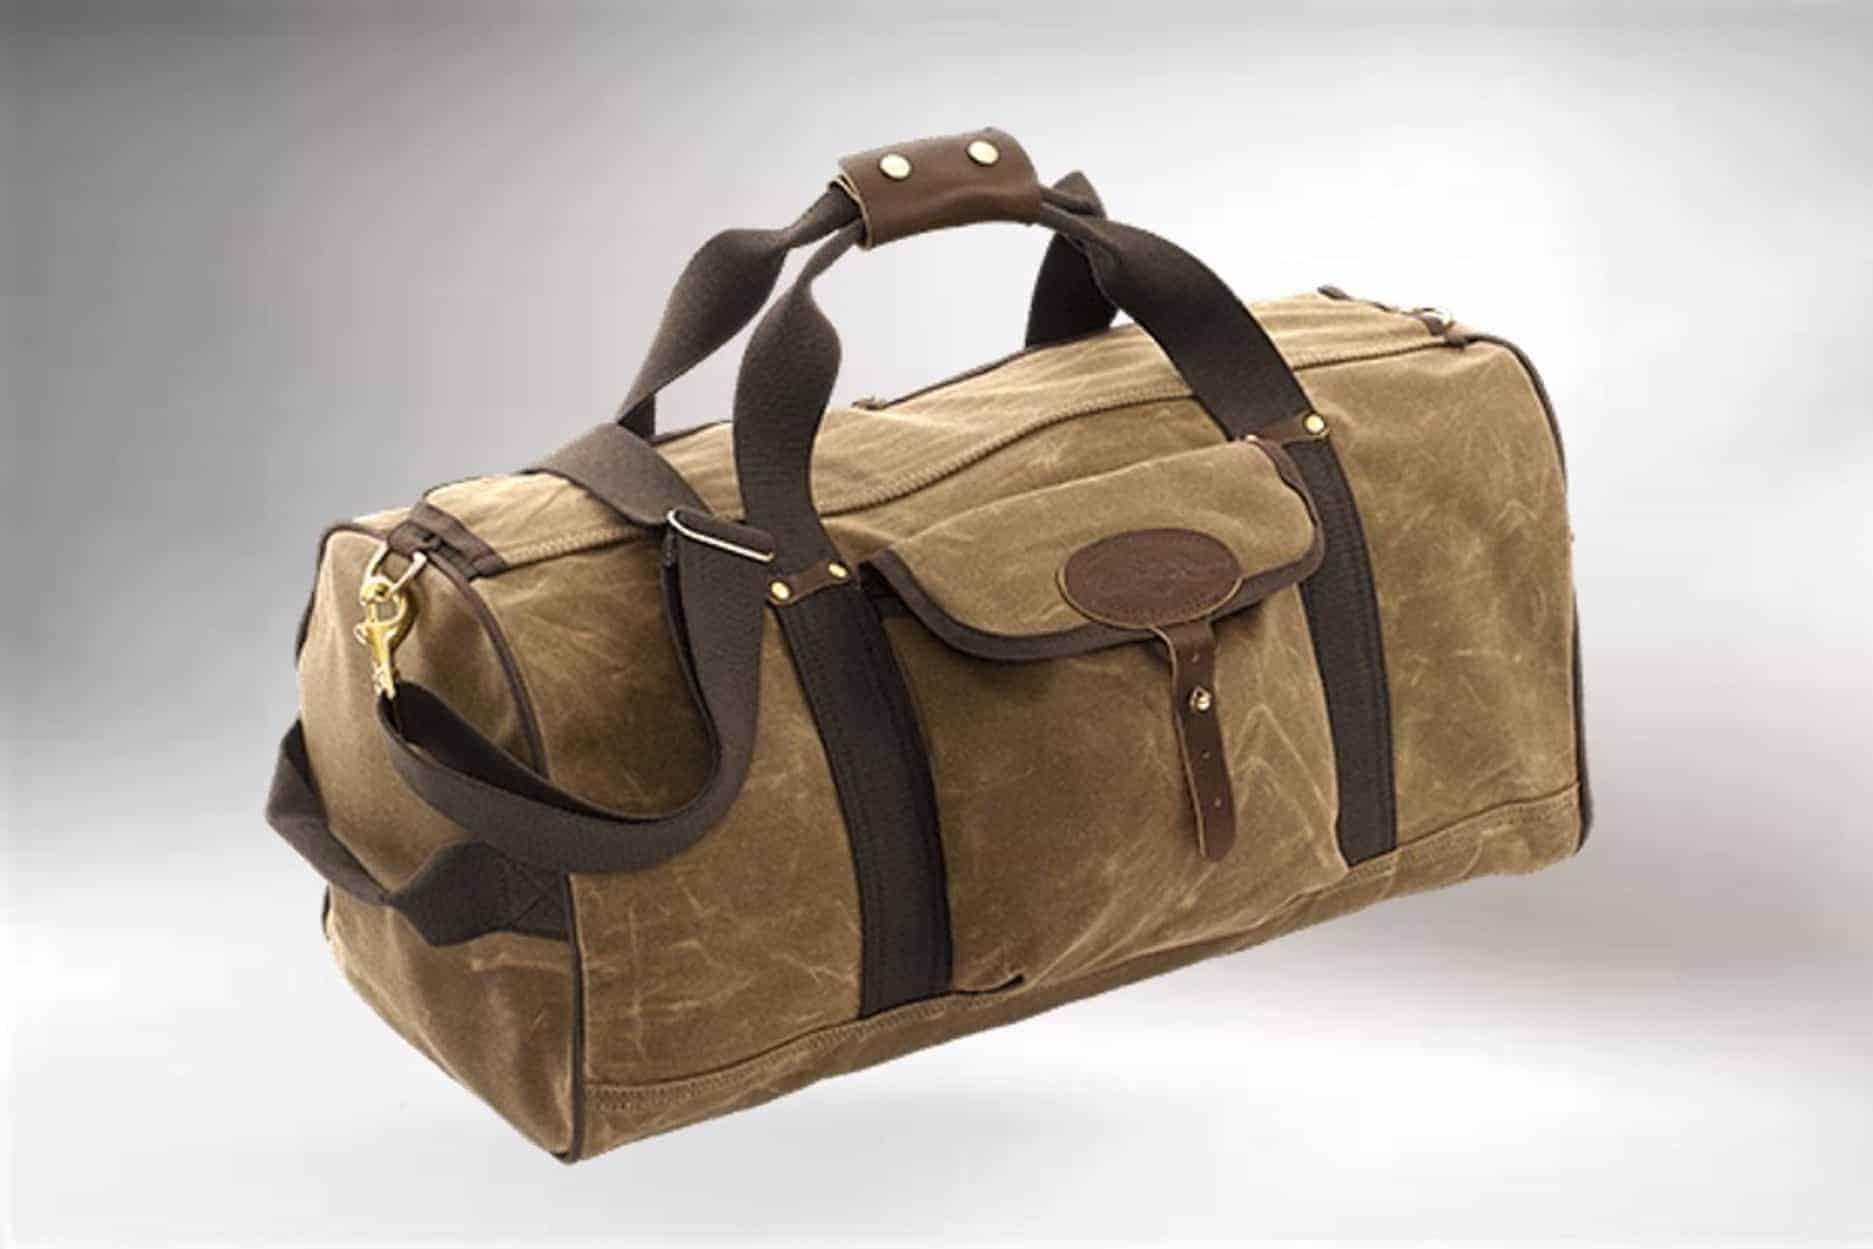 A duffel bag made with waxed canvas as a vegan leather alternative.